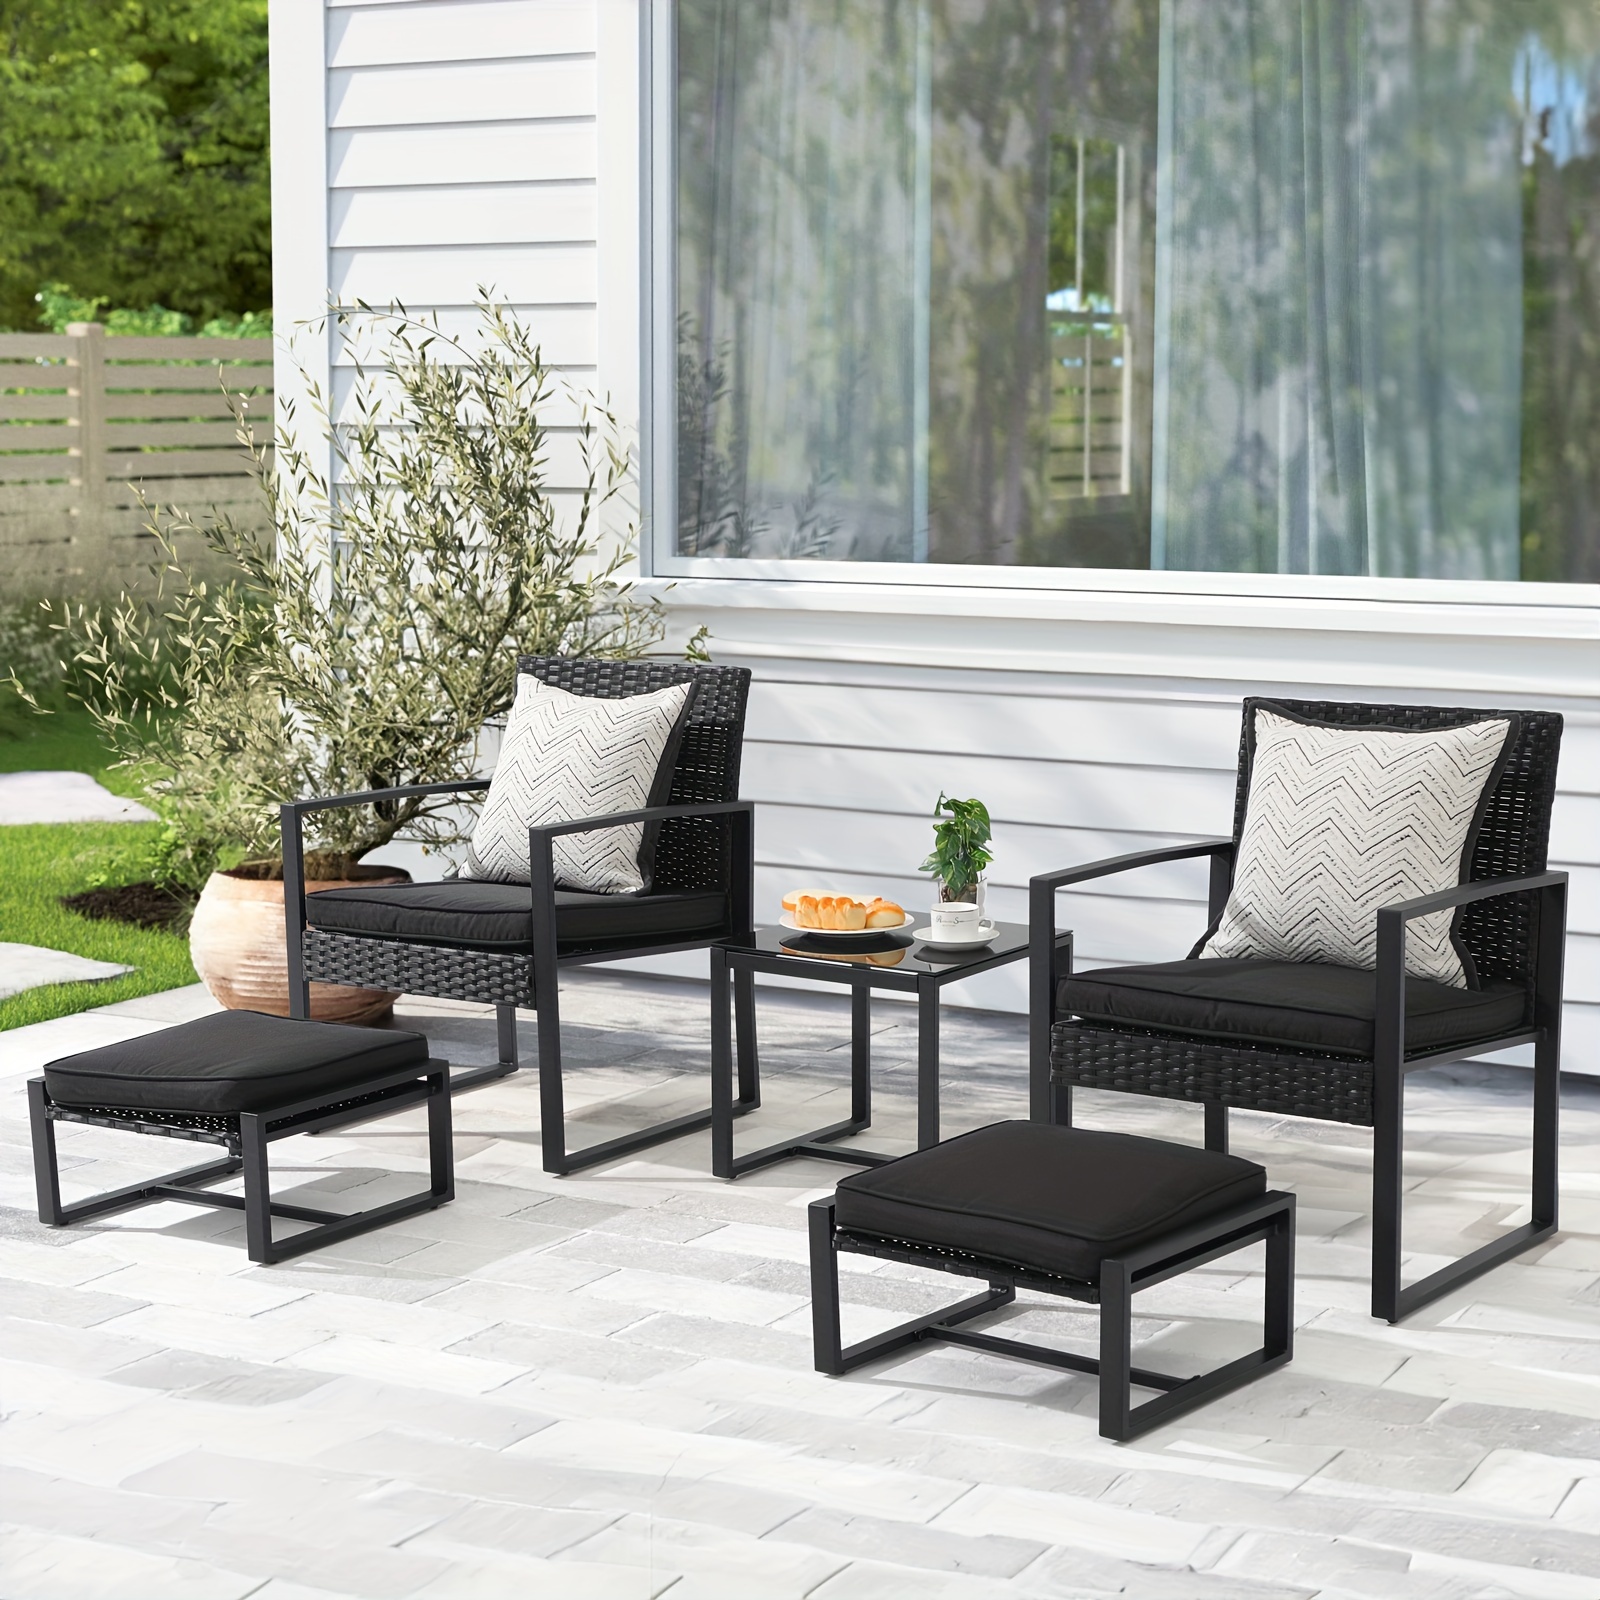 

5pcs Patio Furniture Set, Outdoor Steel Conversation Set, All-weather Wicker With Ottomans & Soft Breathable Cushions, Black